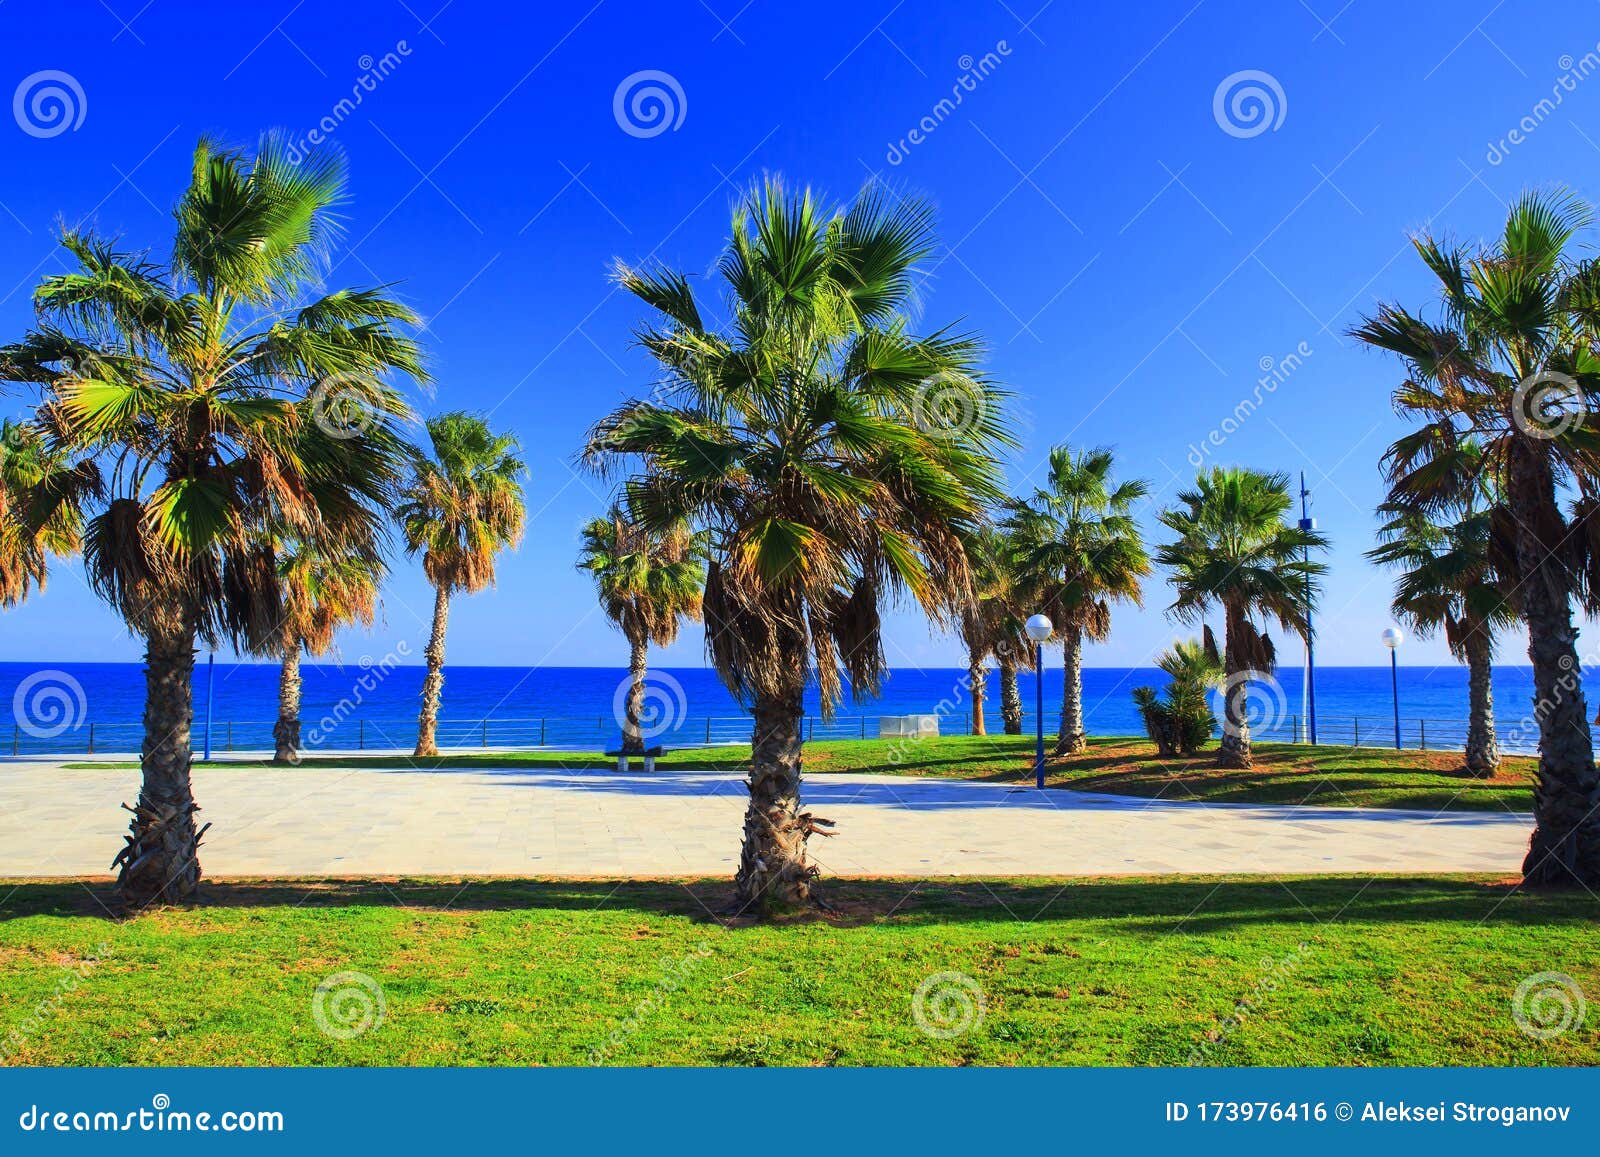 palmtrees on the sea shore in spain on the costa blanca, alicante